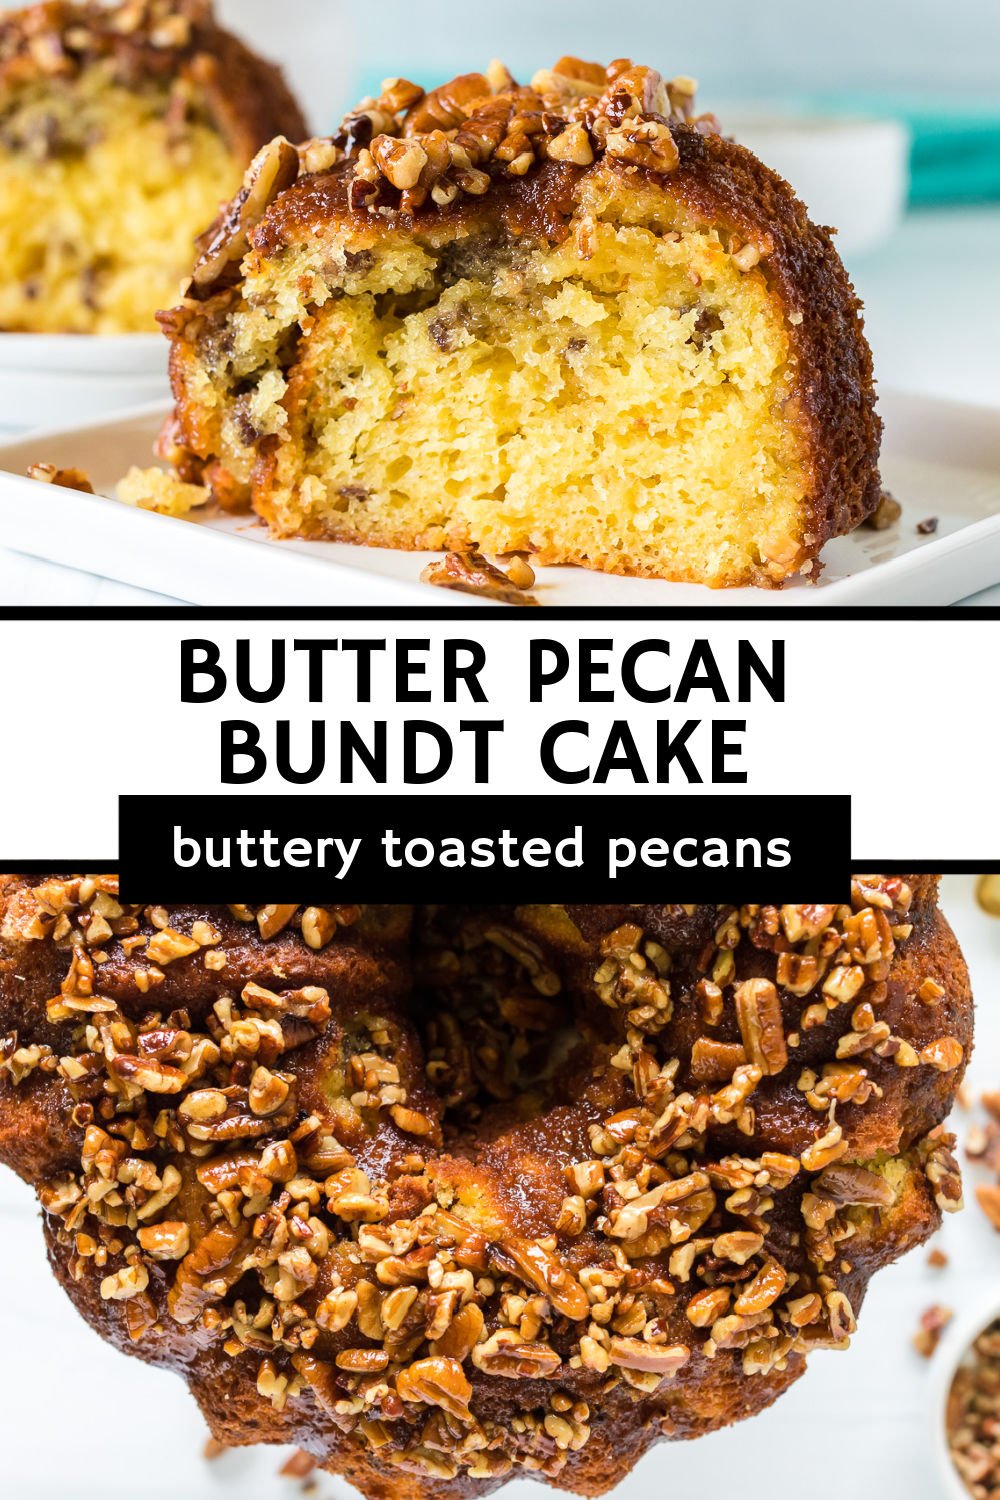 Butter Pecan Bundt Cake starts with a yellow cake mix, is filled with chopped pecans, and is topped with a buttery, sweet glaze full of toasted pecans. Perfect for any occasion and highly addictive! | www.persnicketyplates.com